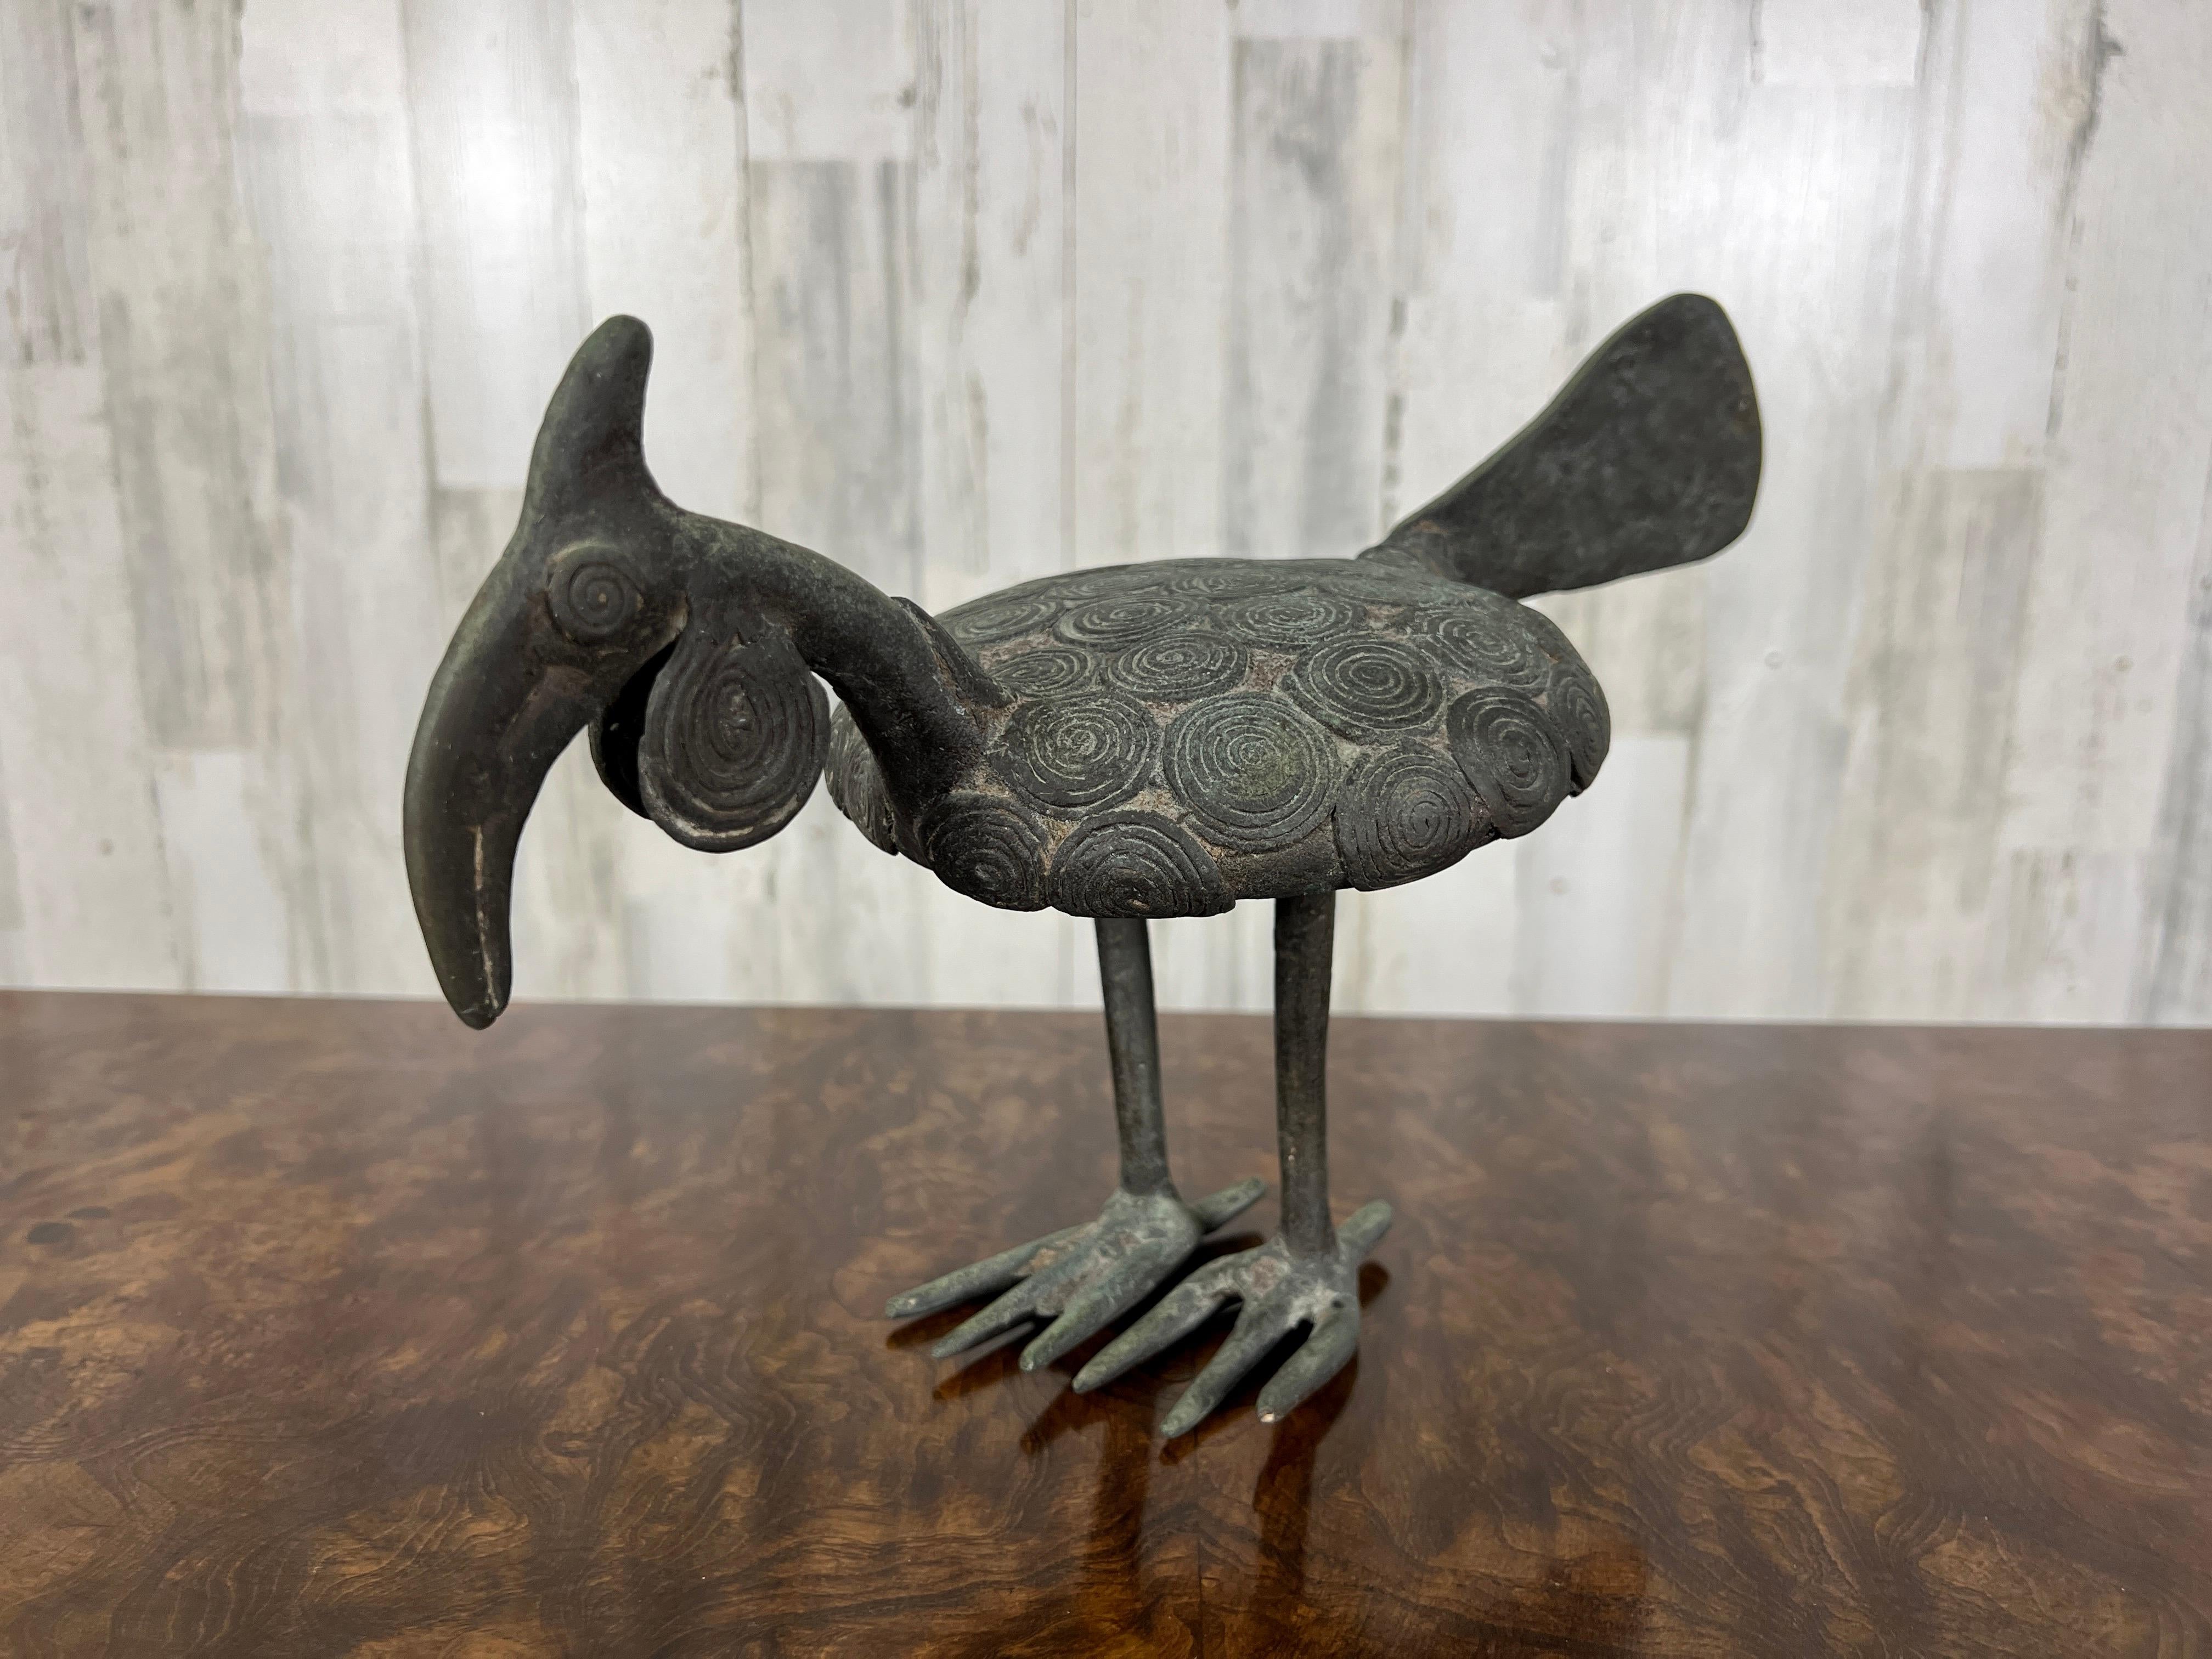 The Ashanti people of Ghana, West Africa, are recognized for their detailed bronze artworks like statues and figurines.
This bronze statue depicts the African Hornbill, a bird native to West and Central Africa. The Ashanti have a rich tradition of